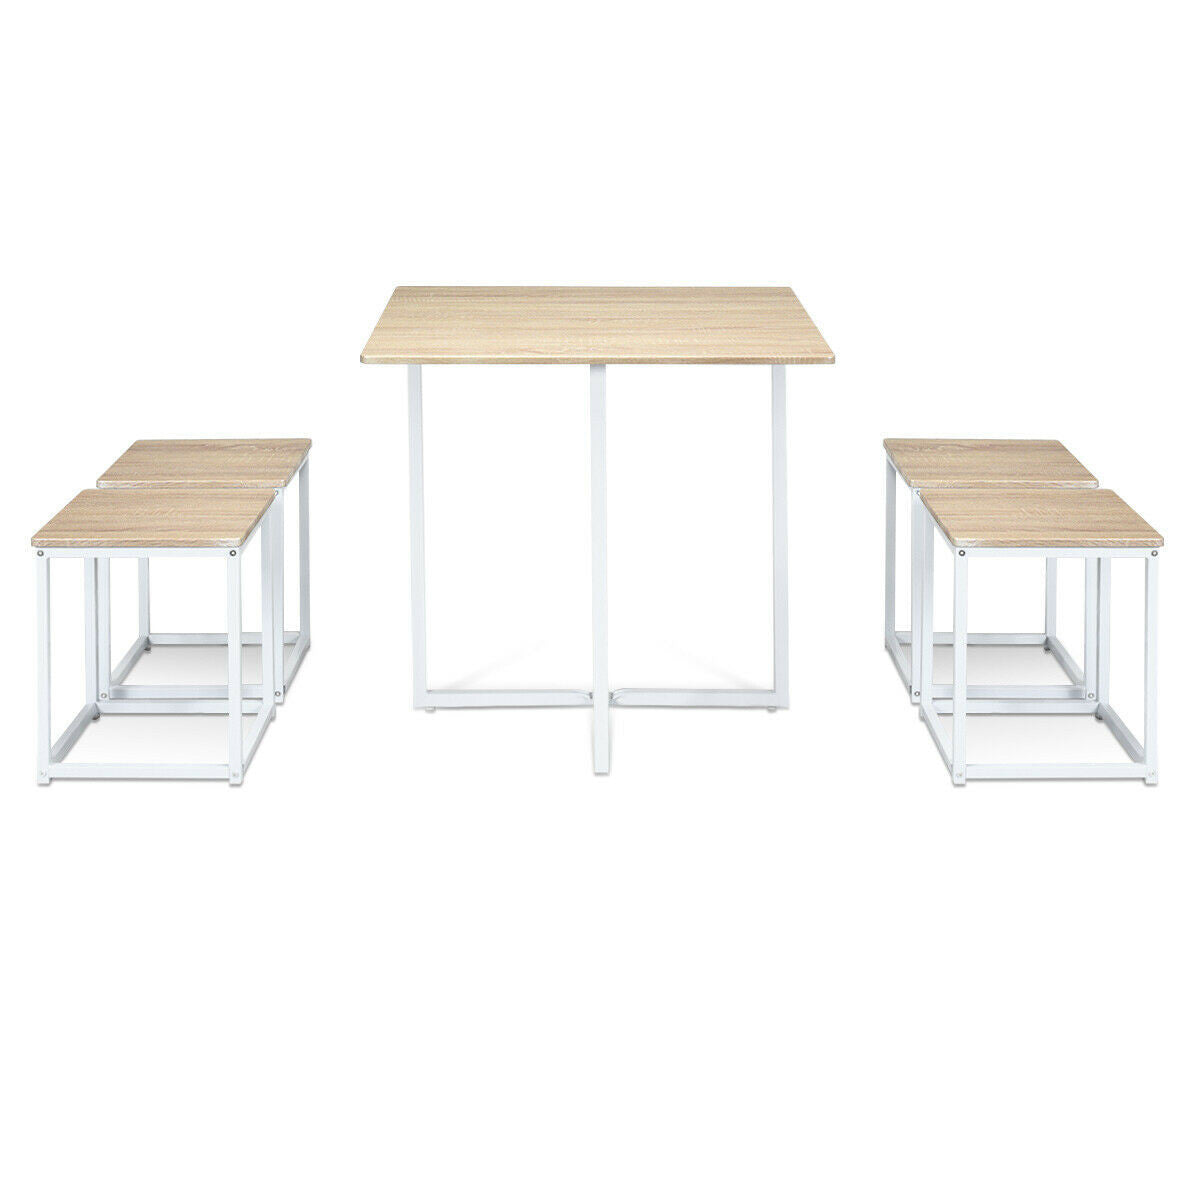 5 Pcs Dining Table And Chairs Set Compact Space Bar